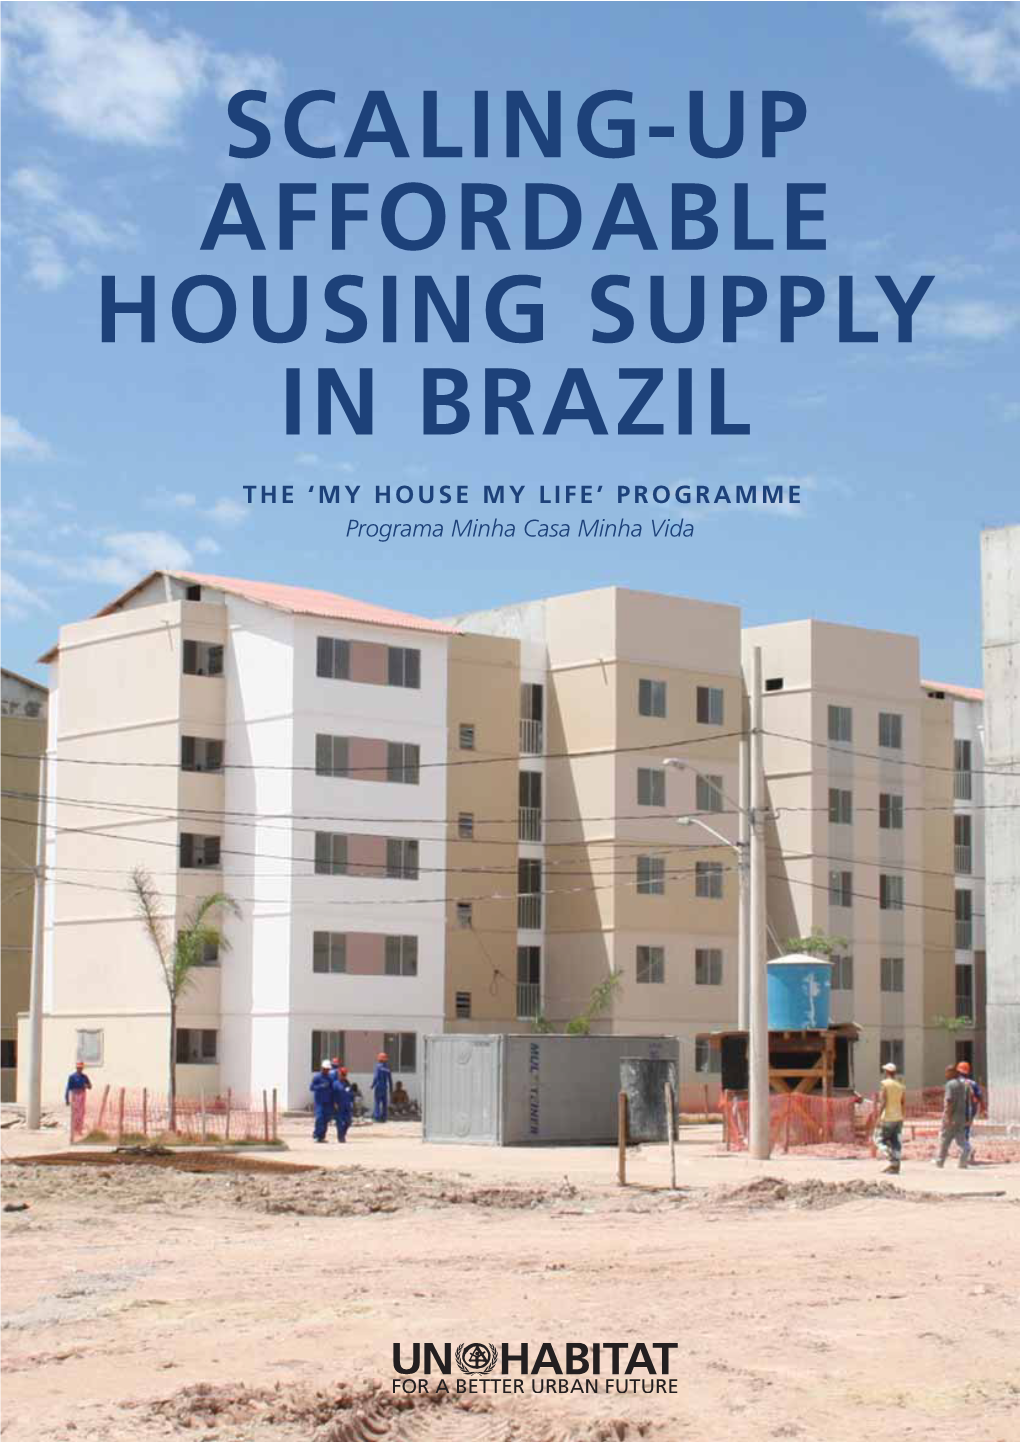 Scaling-Up Affordable Housing Supply in Brazil